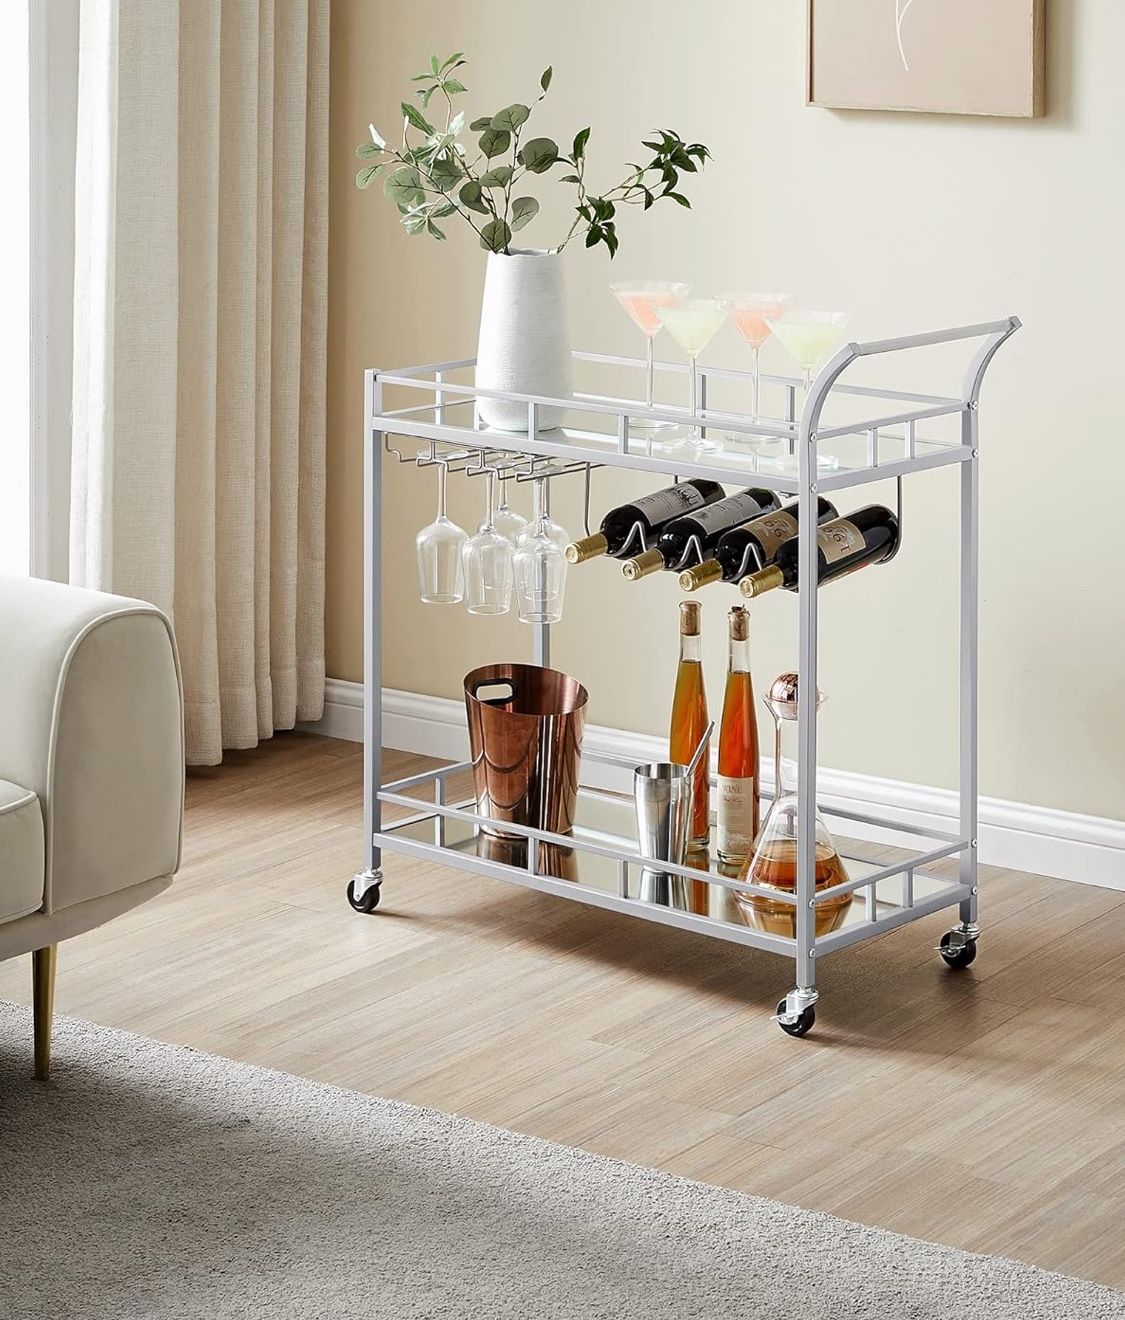 Bar Cart Silver, Home Bar Serving Cart, Wine Cart with 2 Mirrored Shelves, Wine Holders, Glass Holders, for Kitchen, Dining Room, Silver ULRC090E62